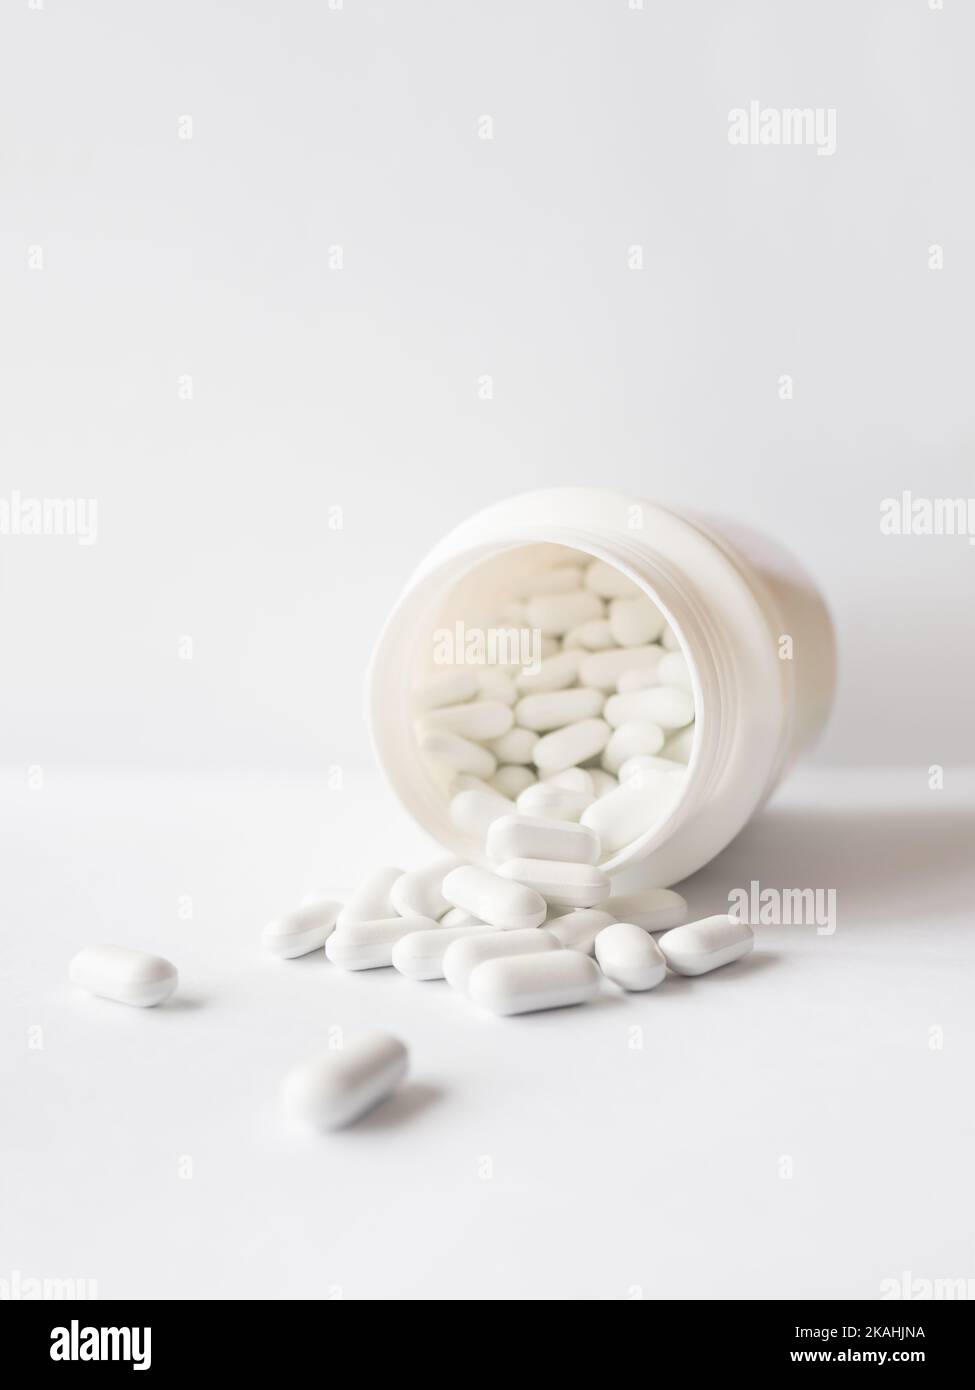 White pills spilled out of a plastic jar. Medicine capsules on white background with copy space. Stock Photo